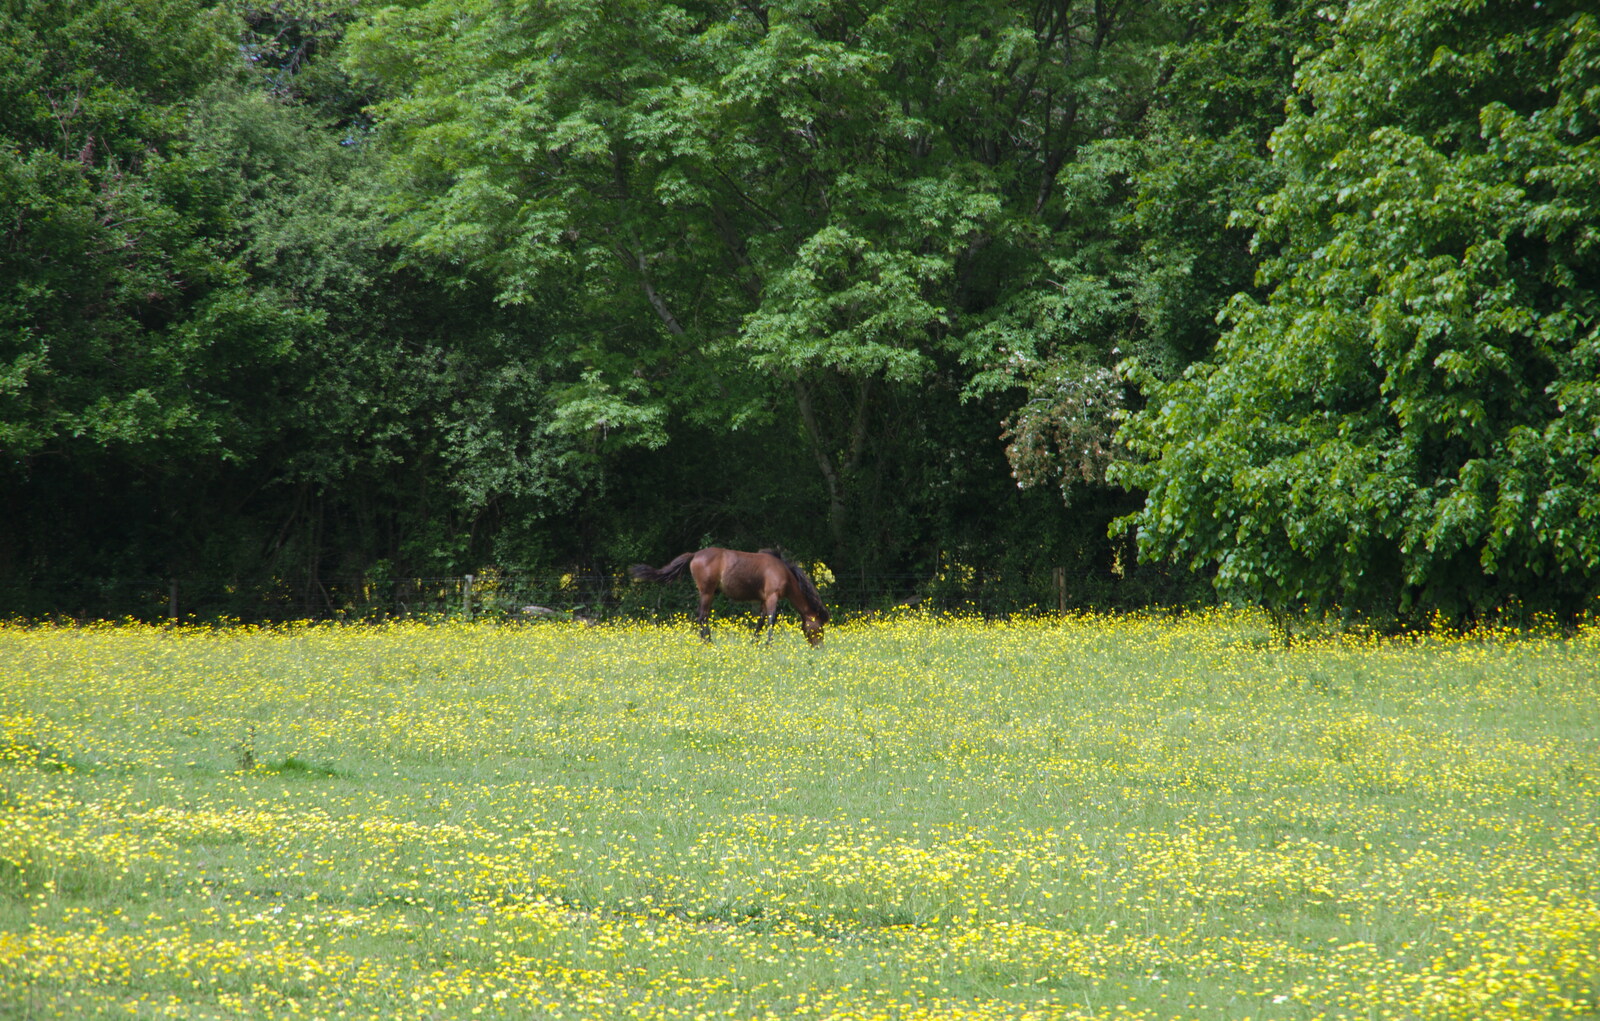 Chagford Lido and a Trip to Parke, Bovey Tracey, Devon - 25th May 2019: A pony in a yellow field